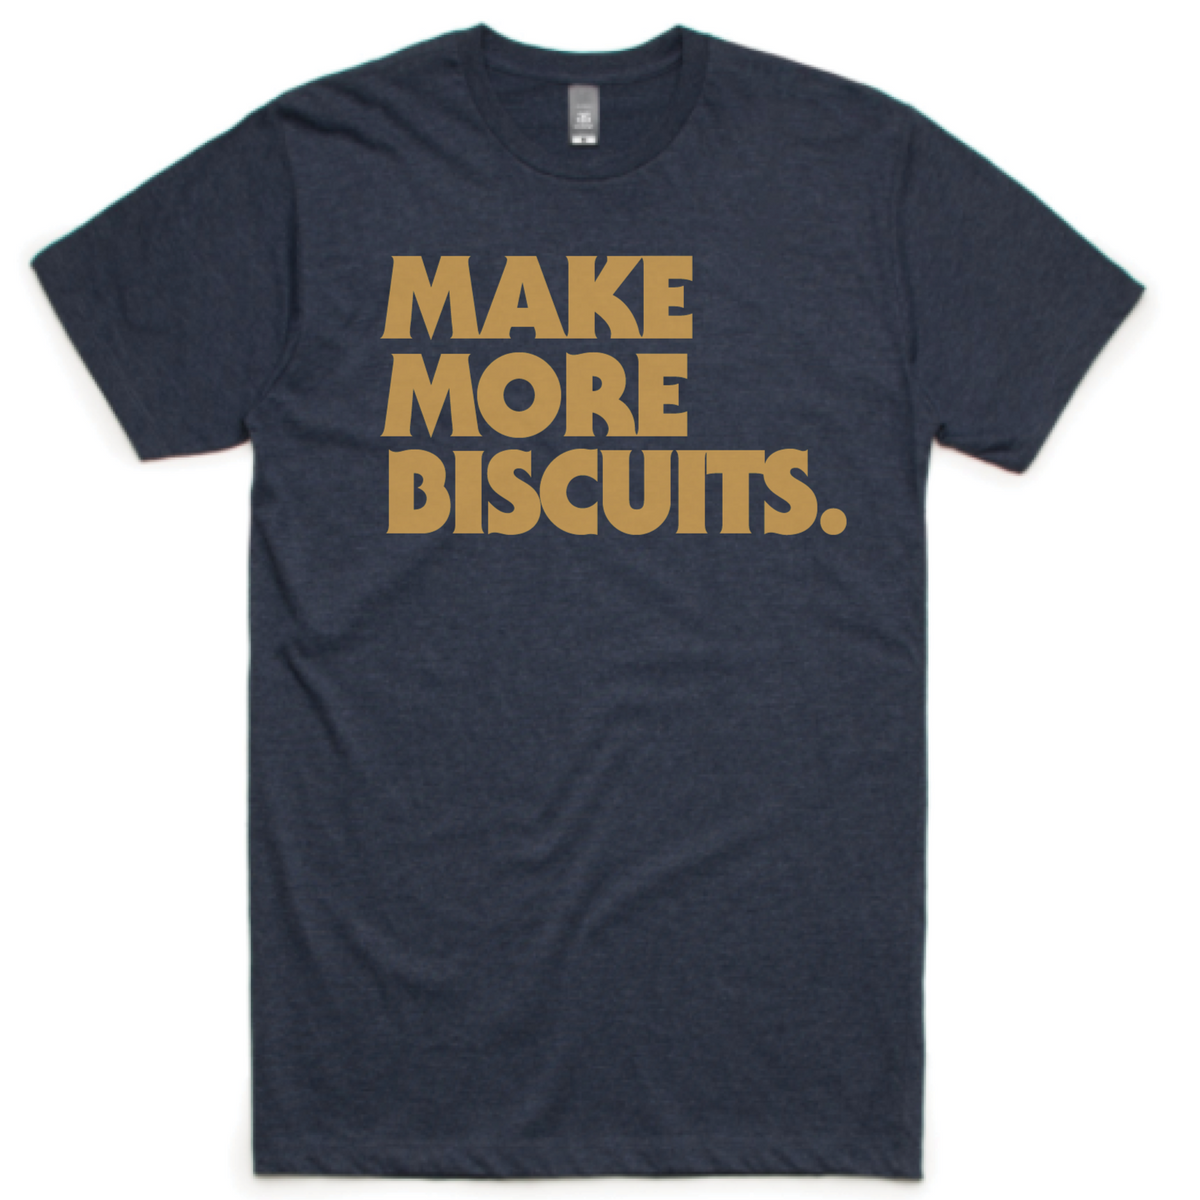 Make More Biscuits